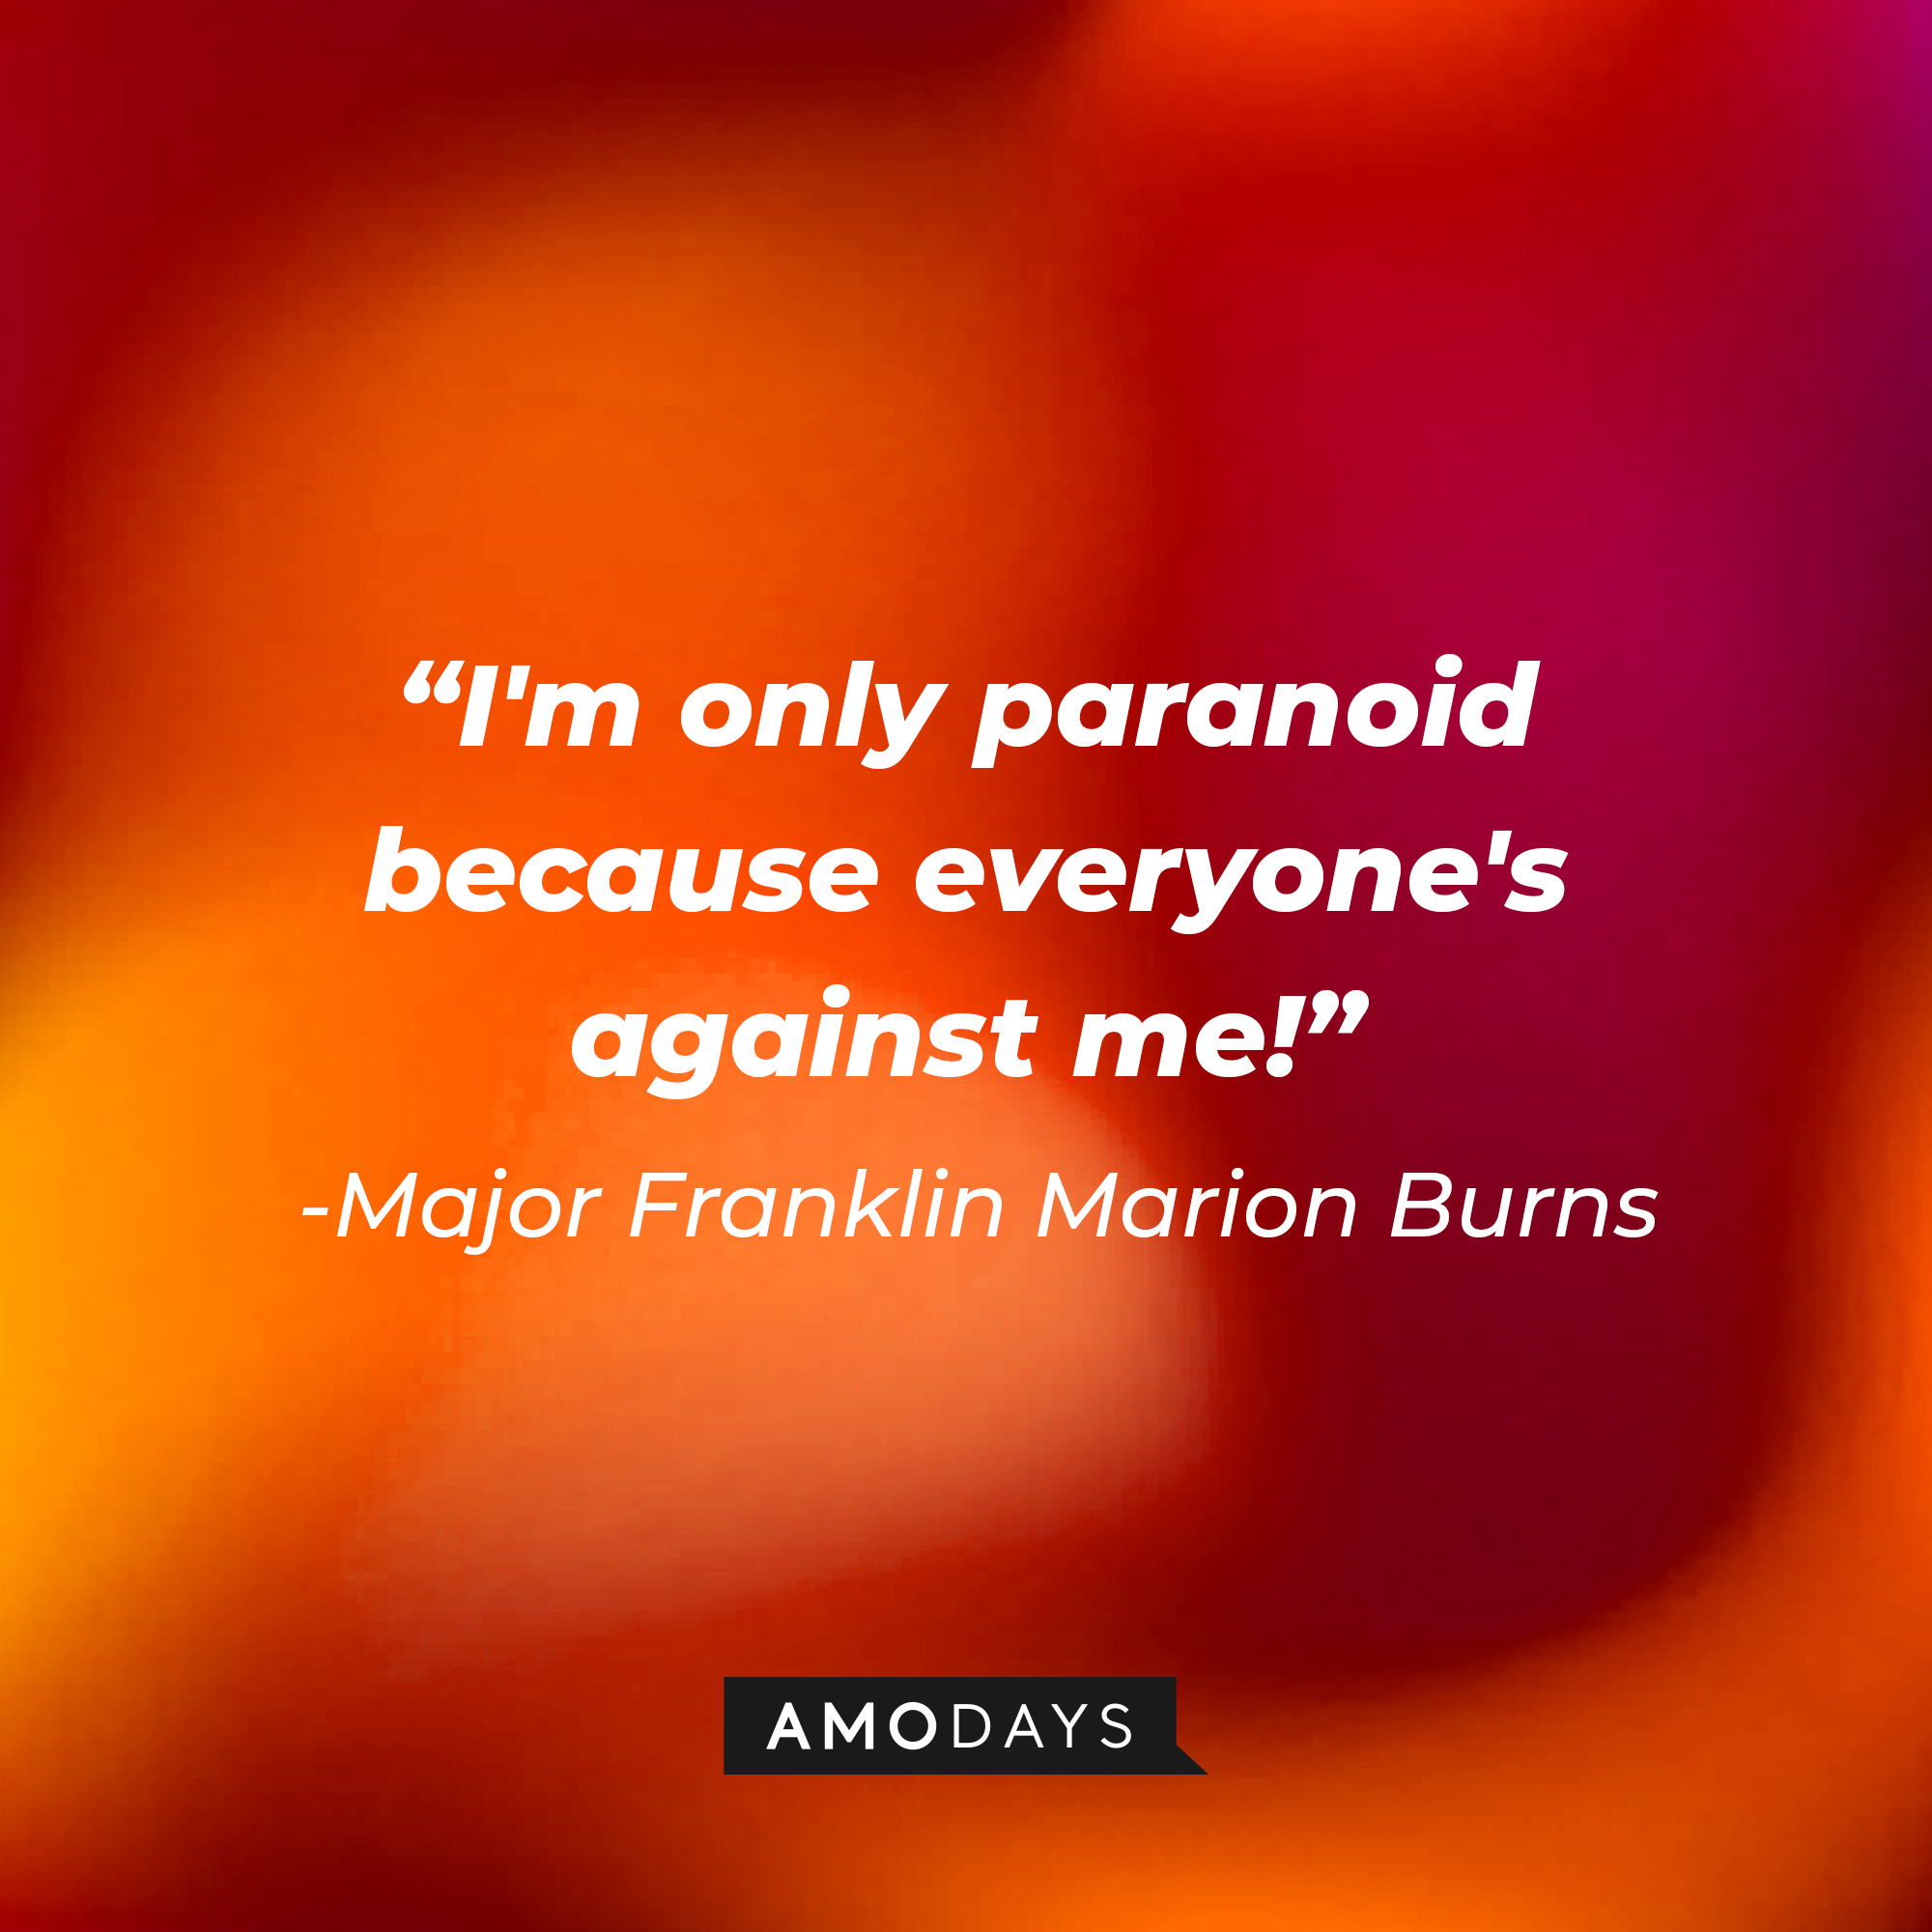 Major Franklin Marion Burn’s quote: “I'm only paranoid because everyone's against me!” | Source: AmoDays